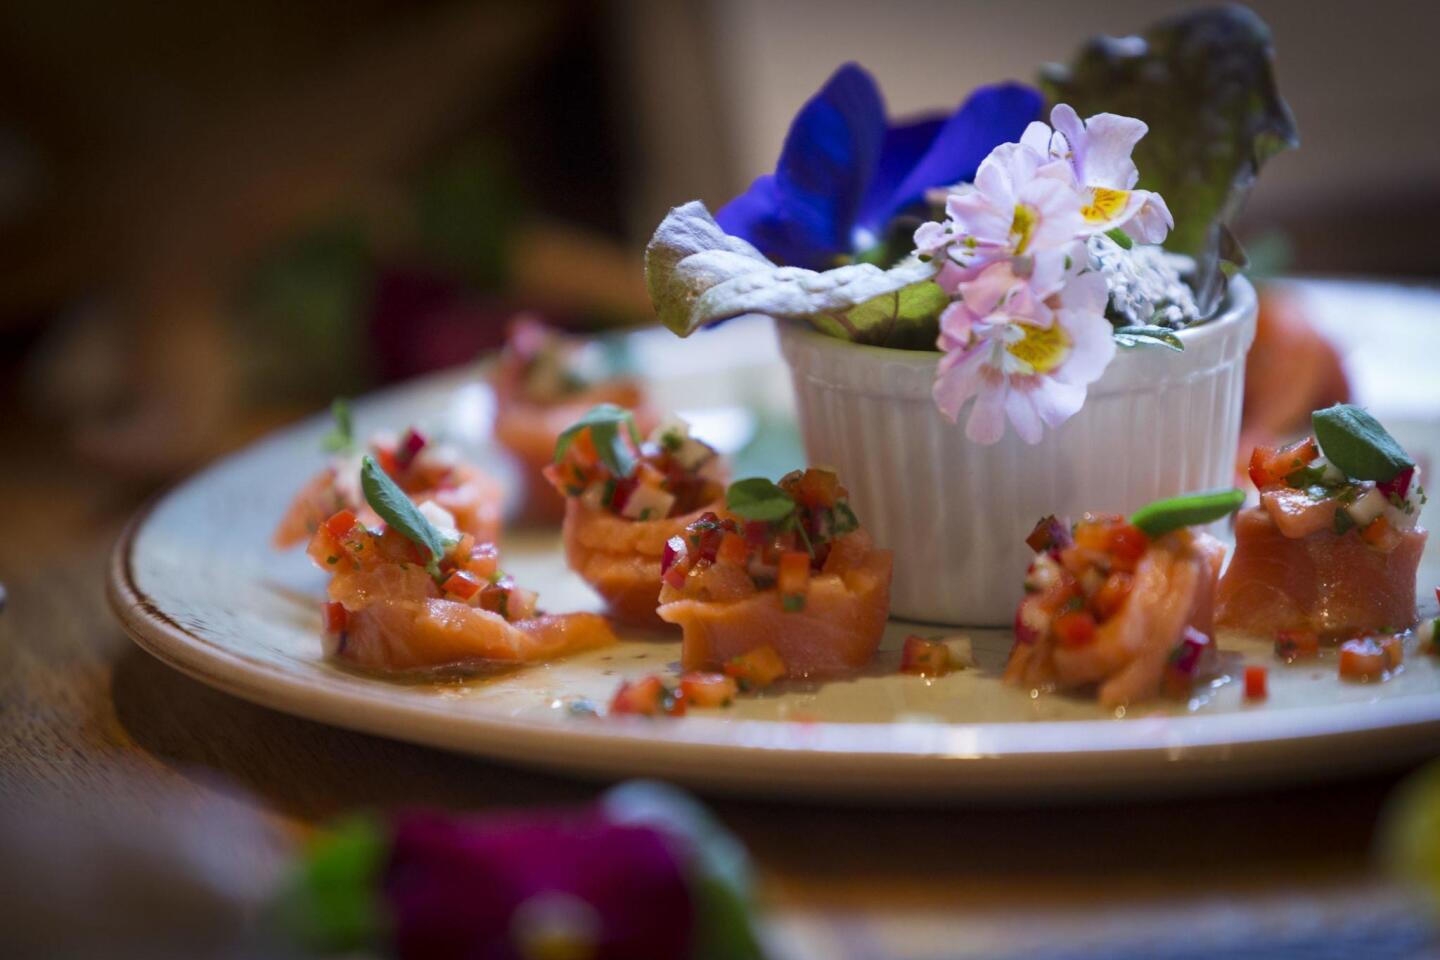 A beautifully presented dish of sockeye salmon with herbs and edible flowers awaits guests at Tutka Bay Lodge, located in an isolated setting accessible only by boat or float plane.